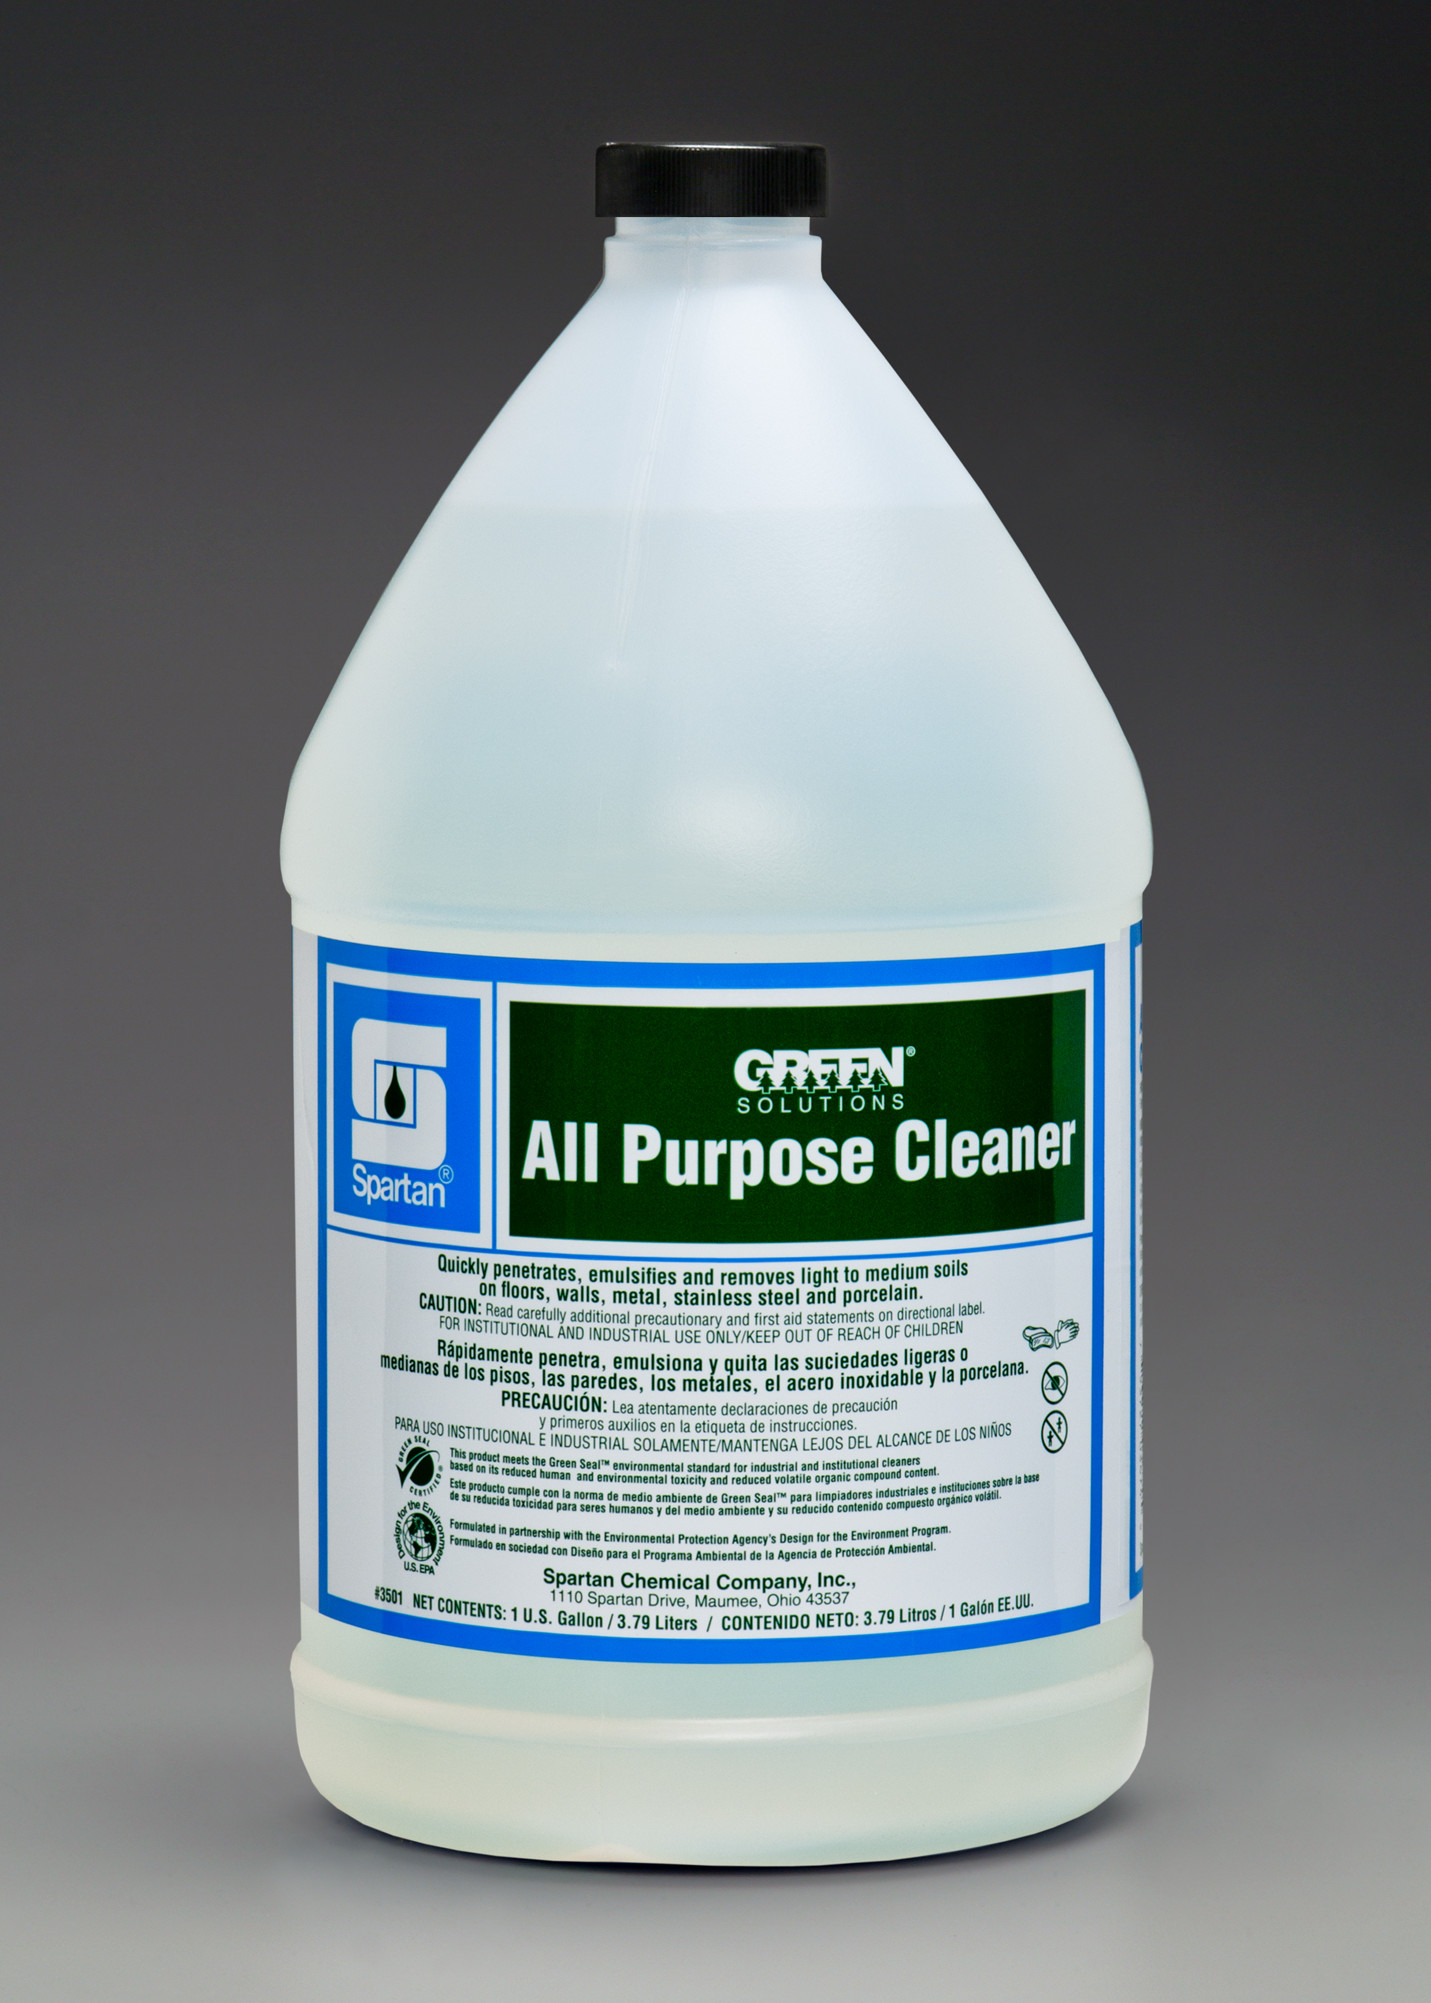 Green+Solutions+All+Purpose+Cleaner+%7B1+gallon+%284+per+case%29%7D